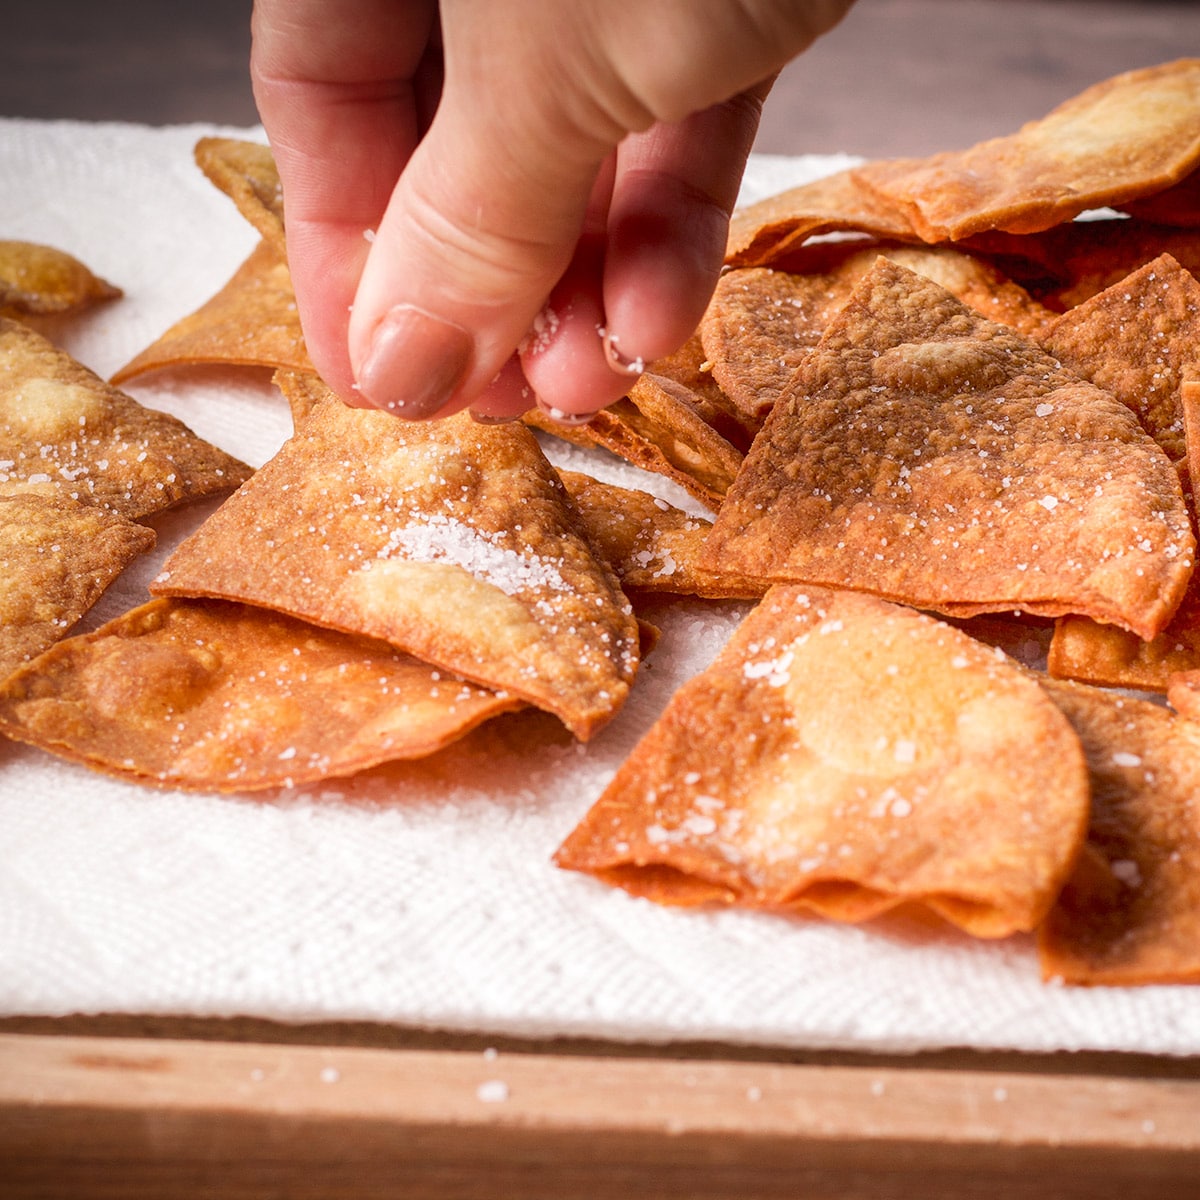 Sprinkle salt over homemade corn tortilla chips immediately after removing them from the hot oil.